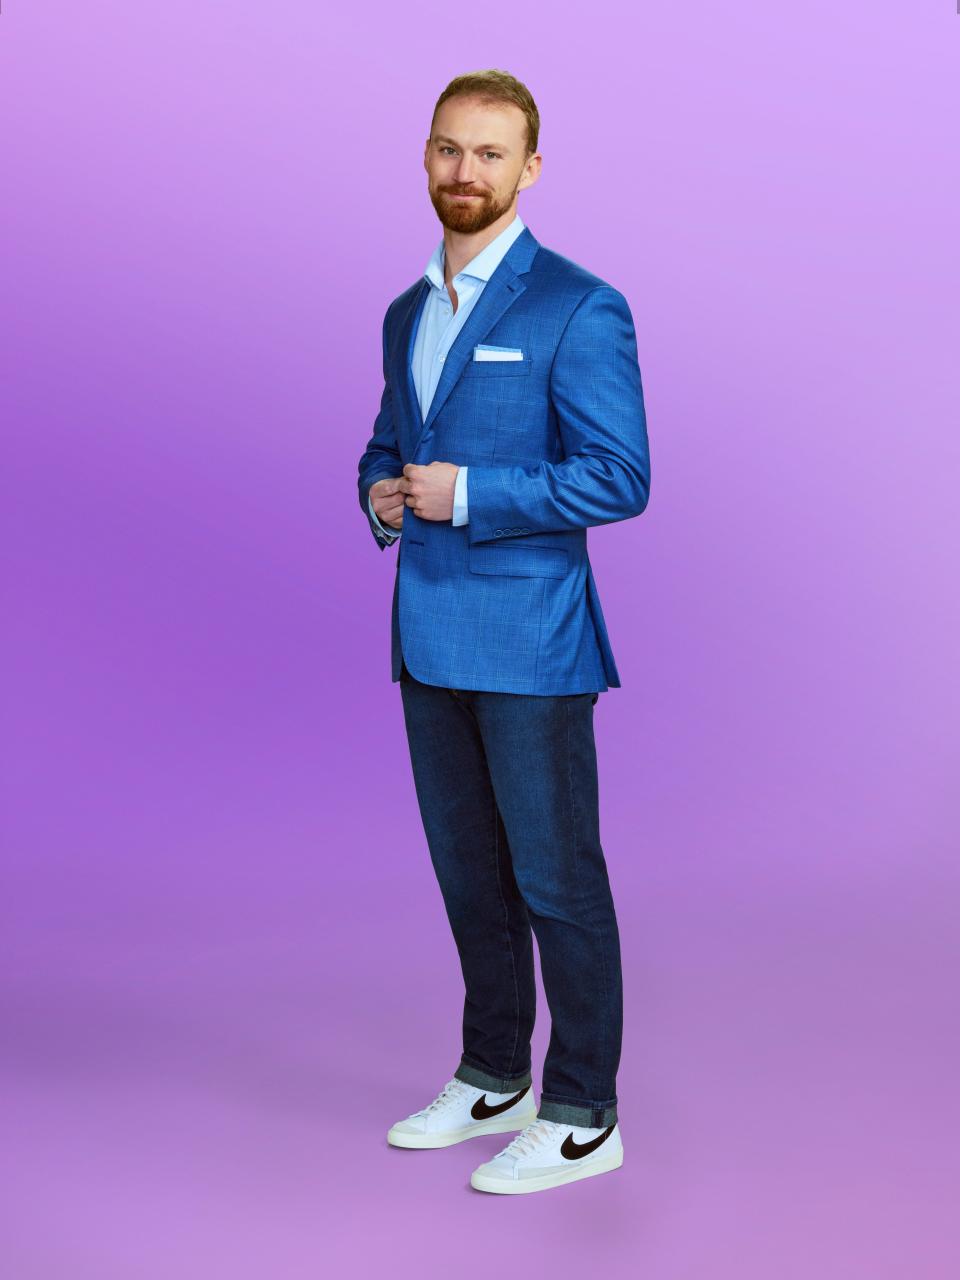 Ben, a contestant on "Love Is Blind" season 6, wearing a blue jacket and jeans